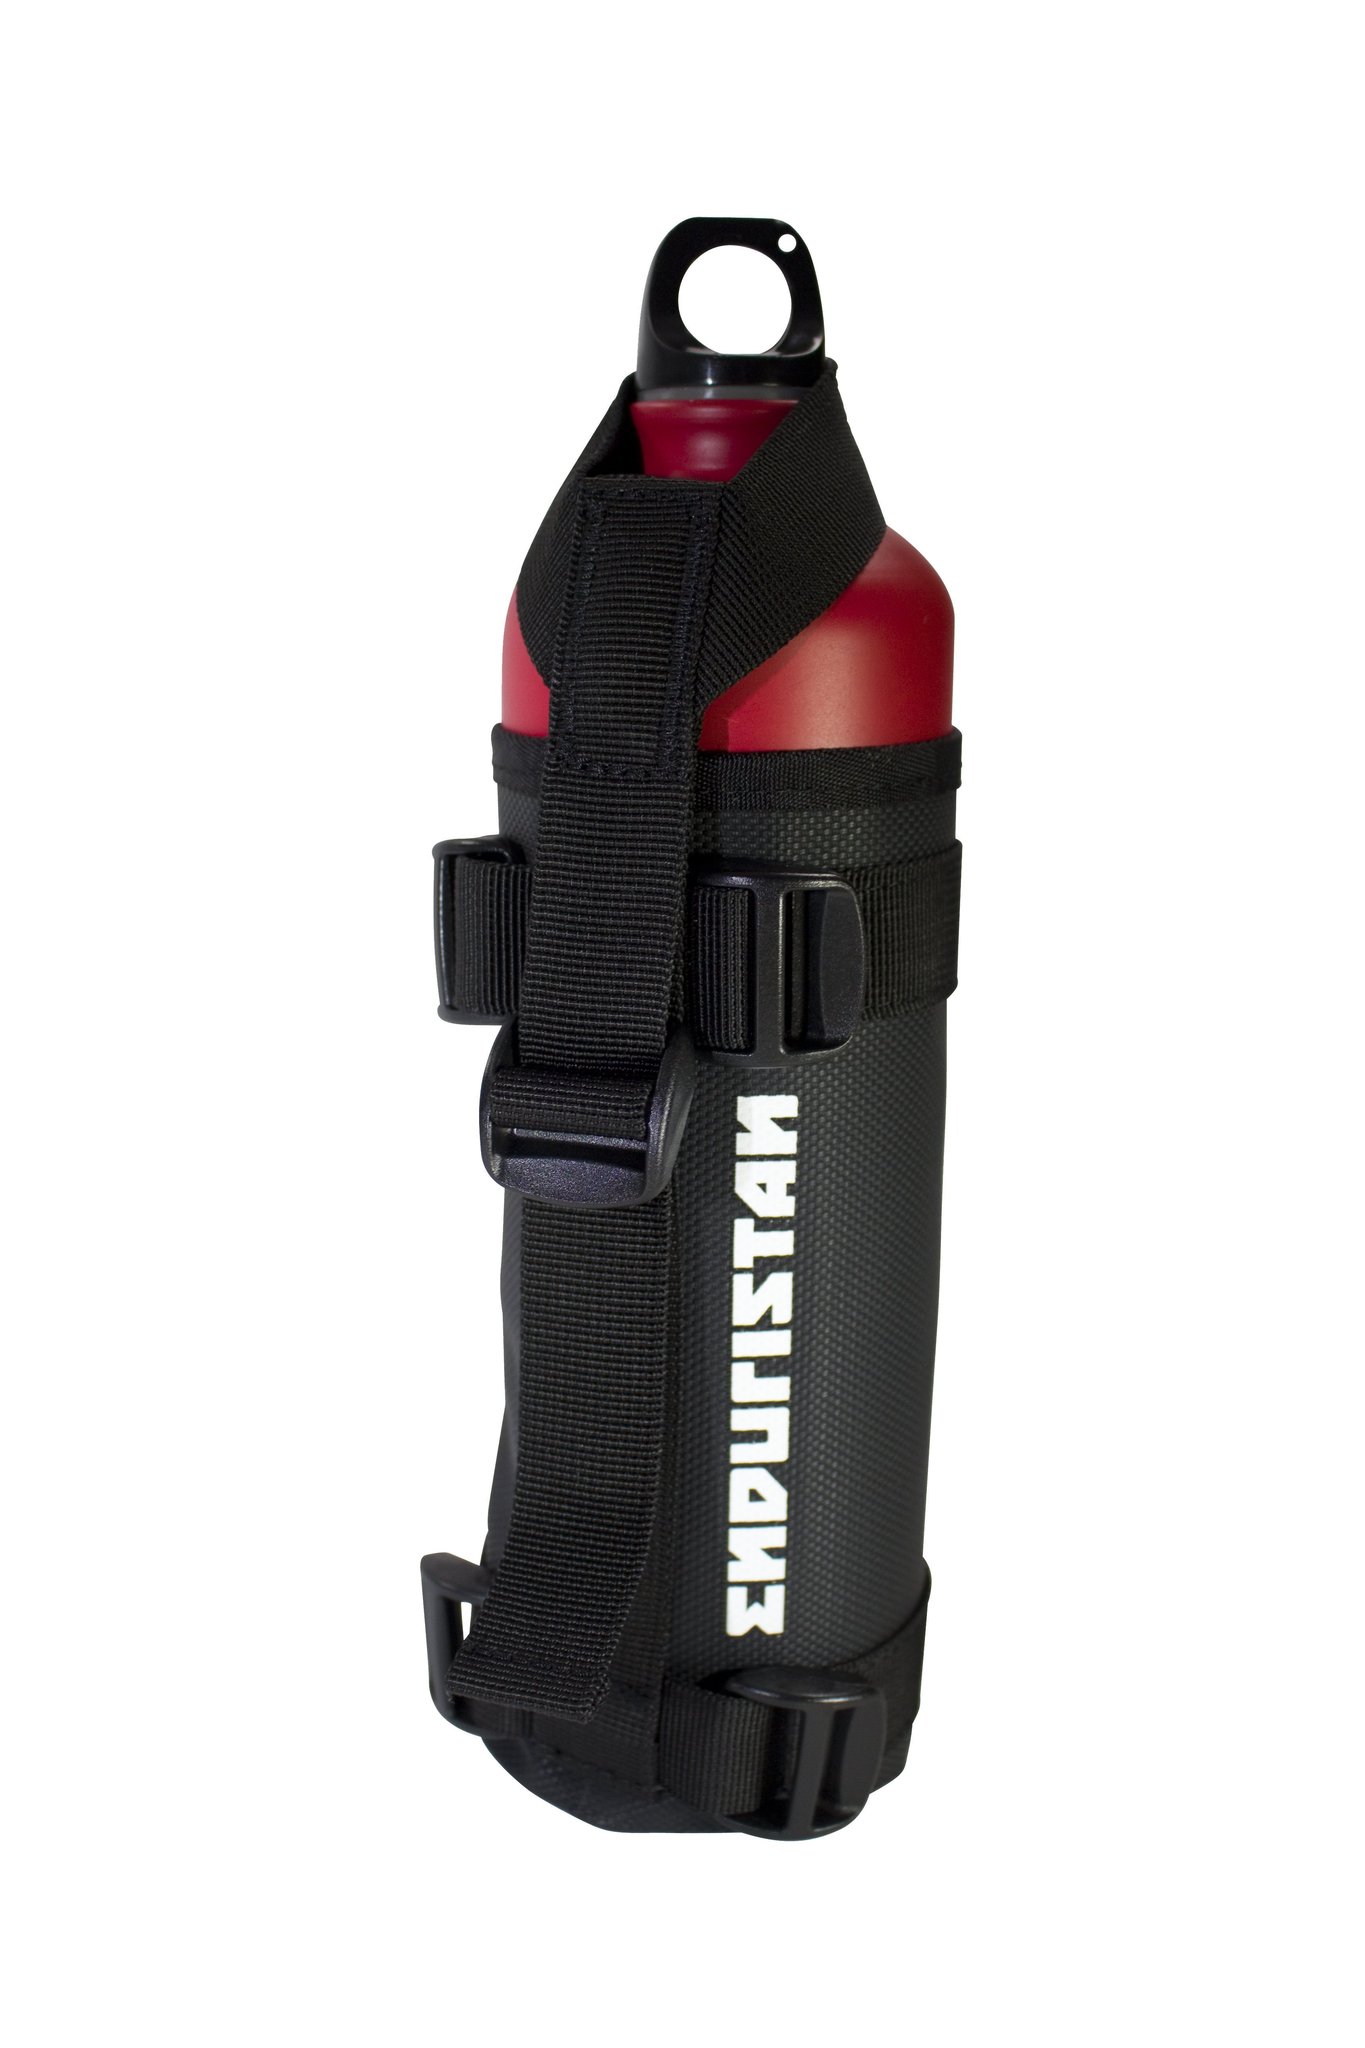 LUBO-001 Enduristan Bottle Holster NEXT DAY DELIVERY